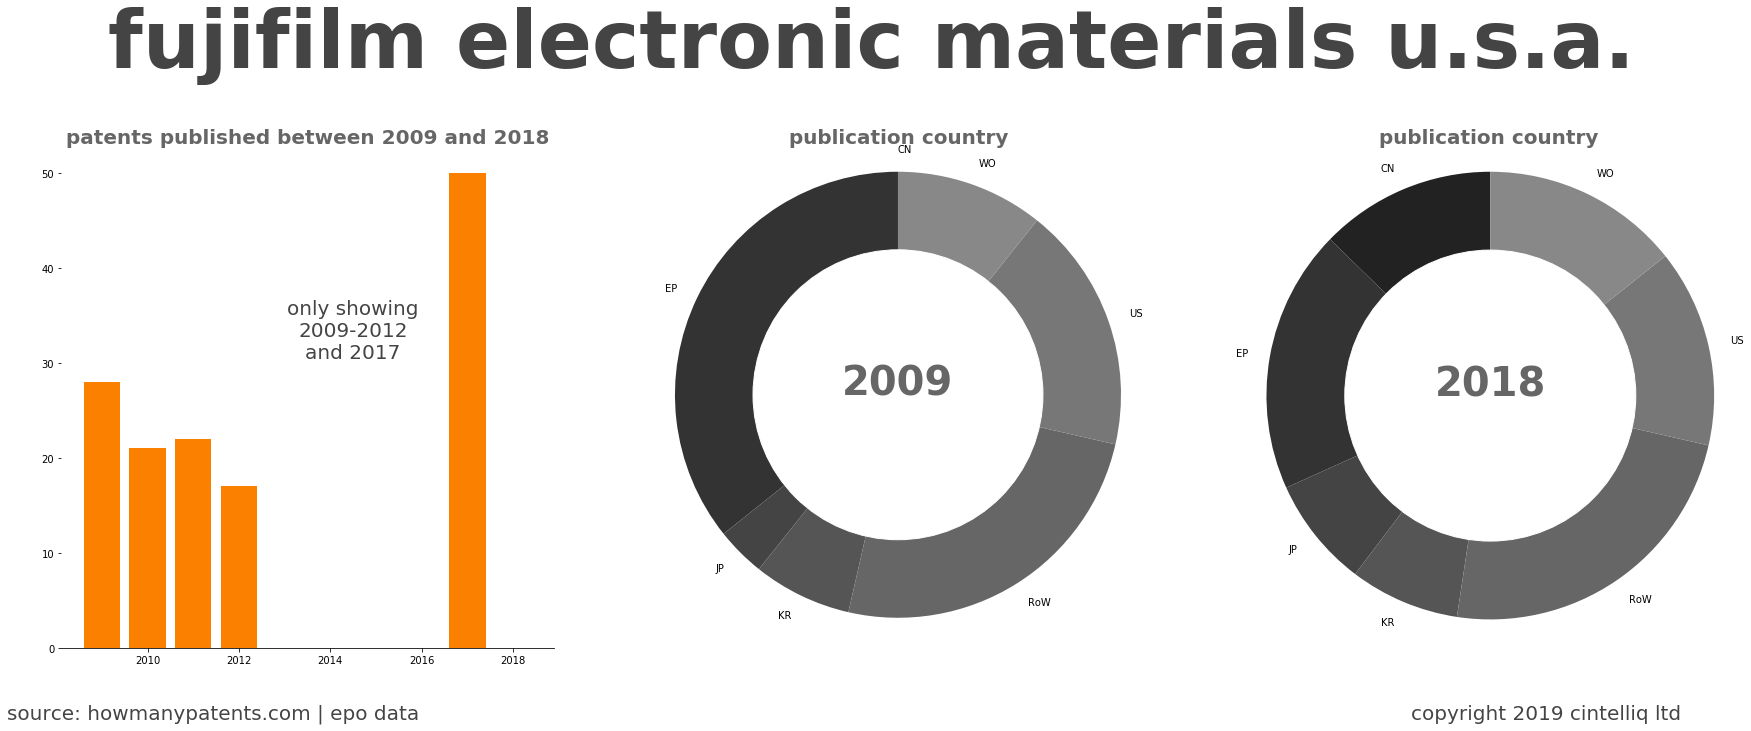 summary of patents for Fujifilm Electronic Materials U.S.A.